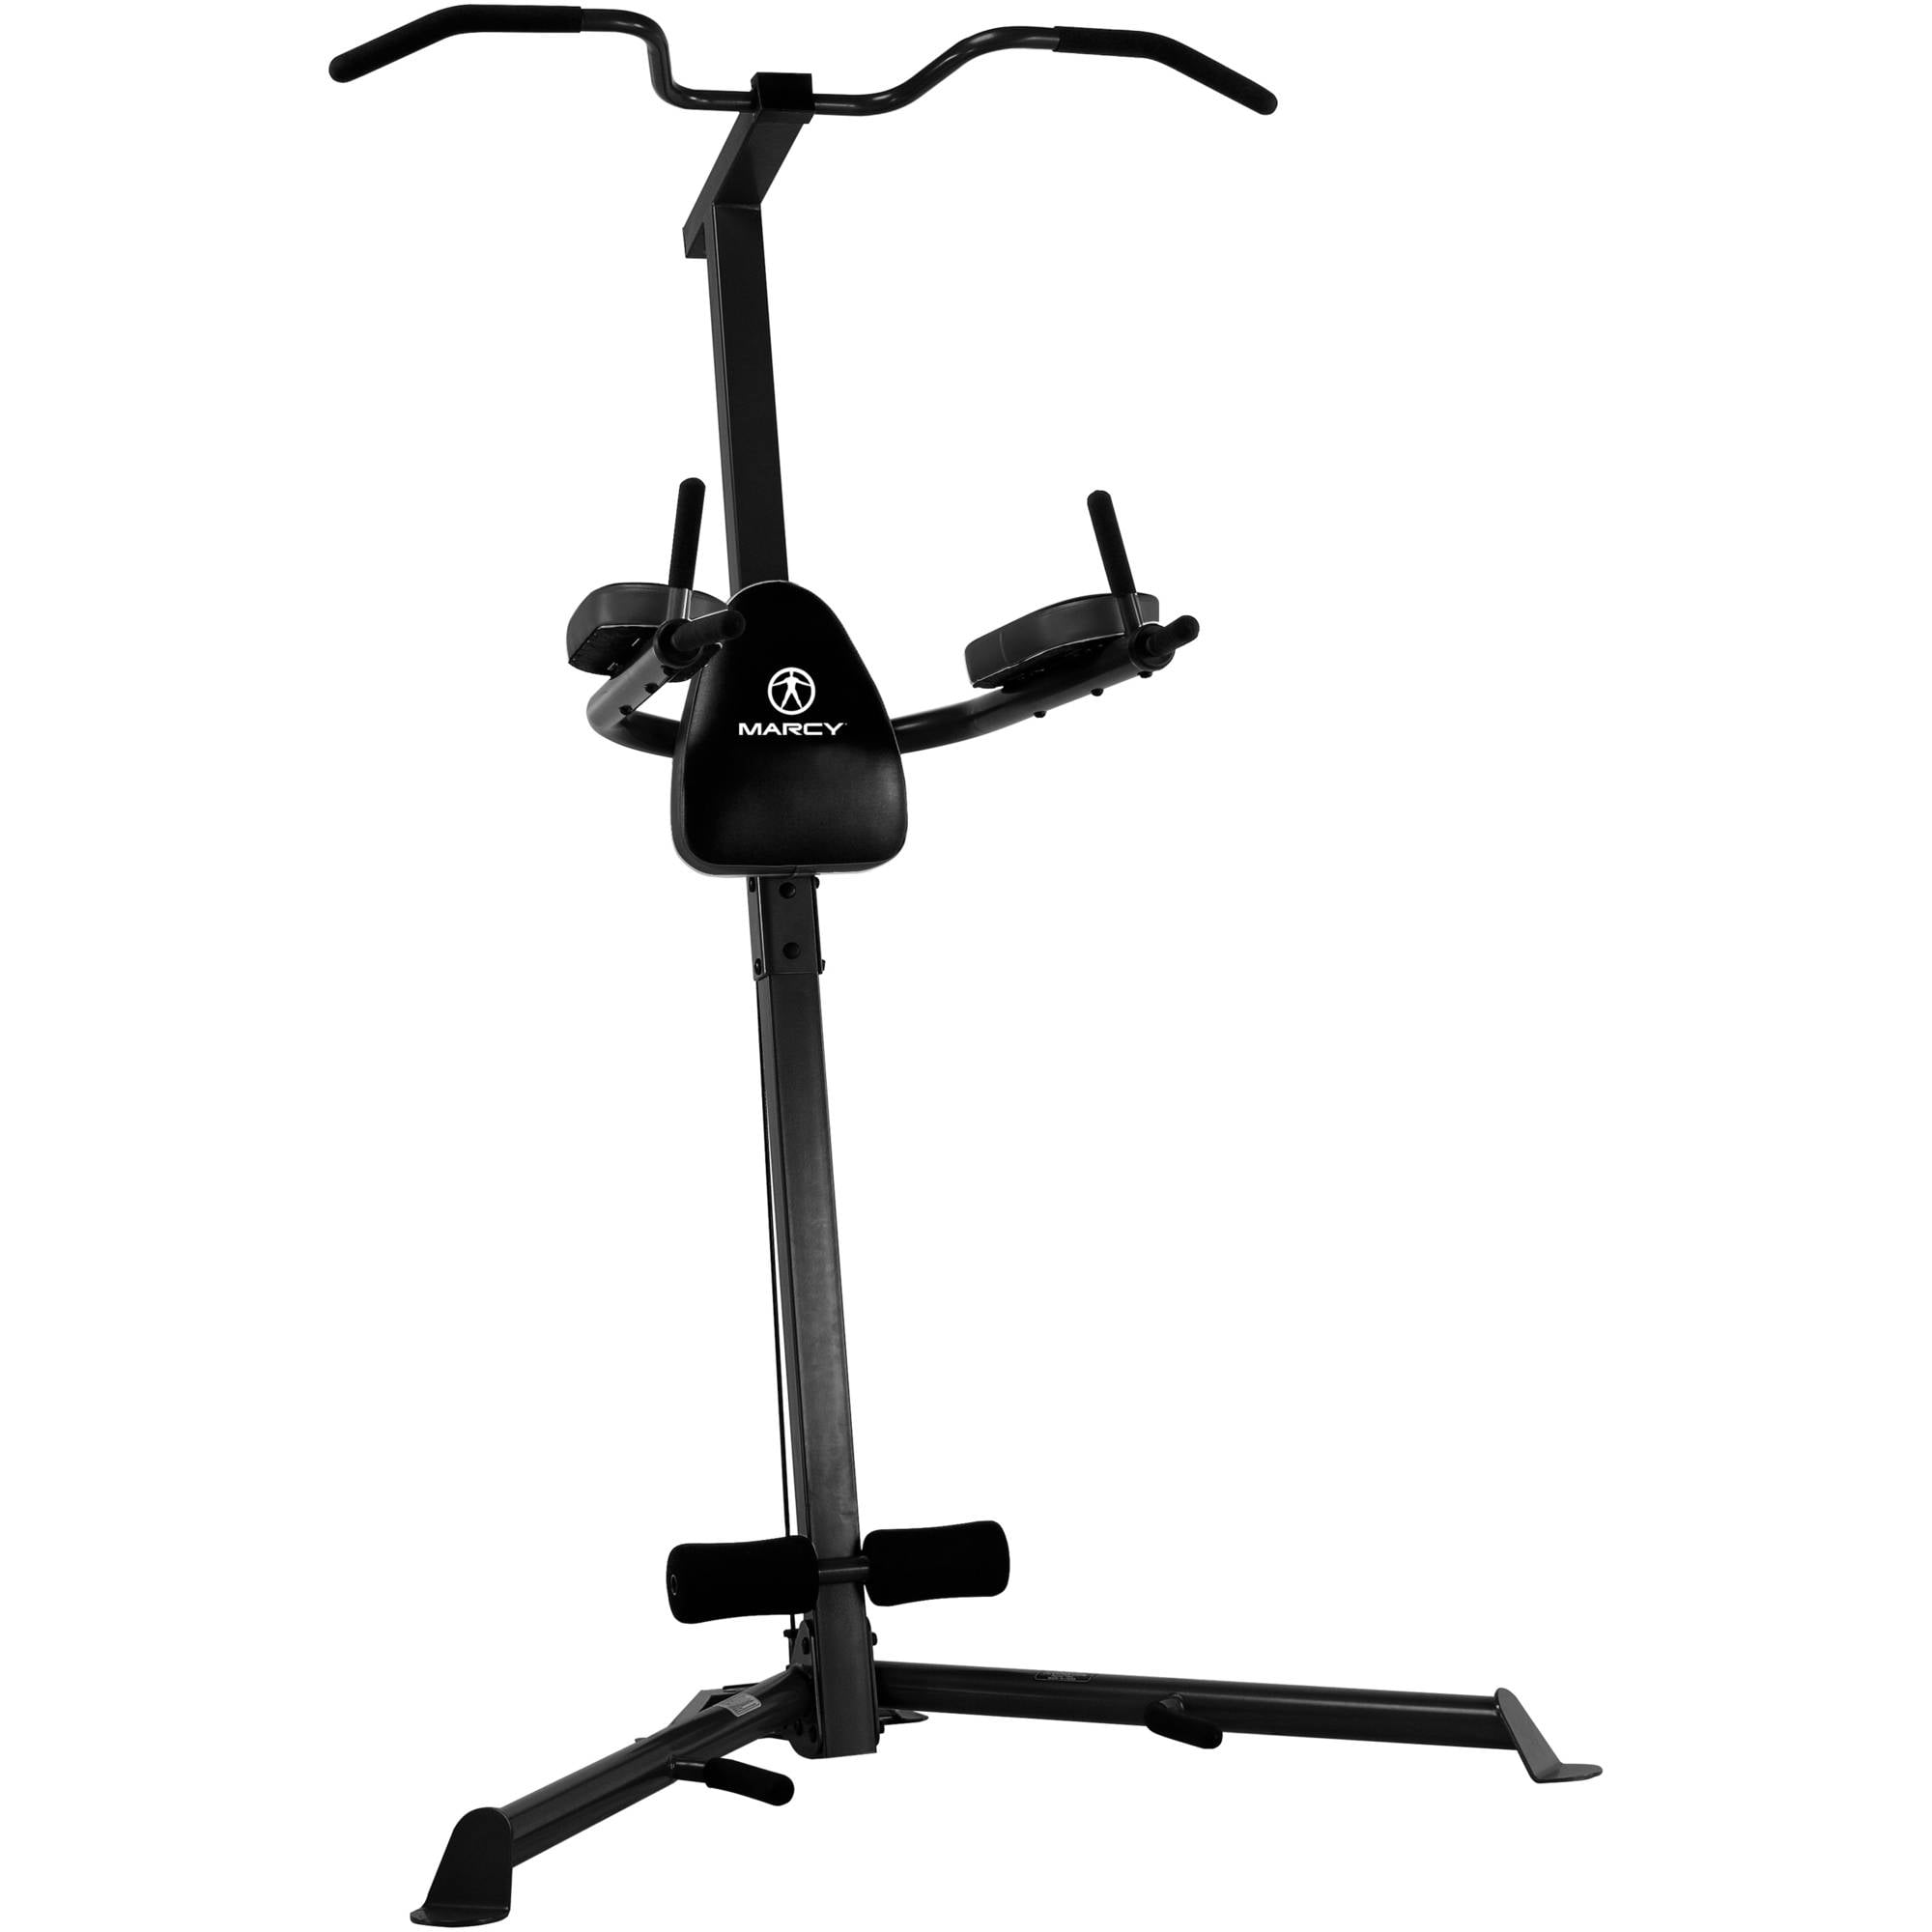 Marcy Power Tower Multi Workout Home Gym Pull Up Chin Up Dip Station VKR TC-3508 